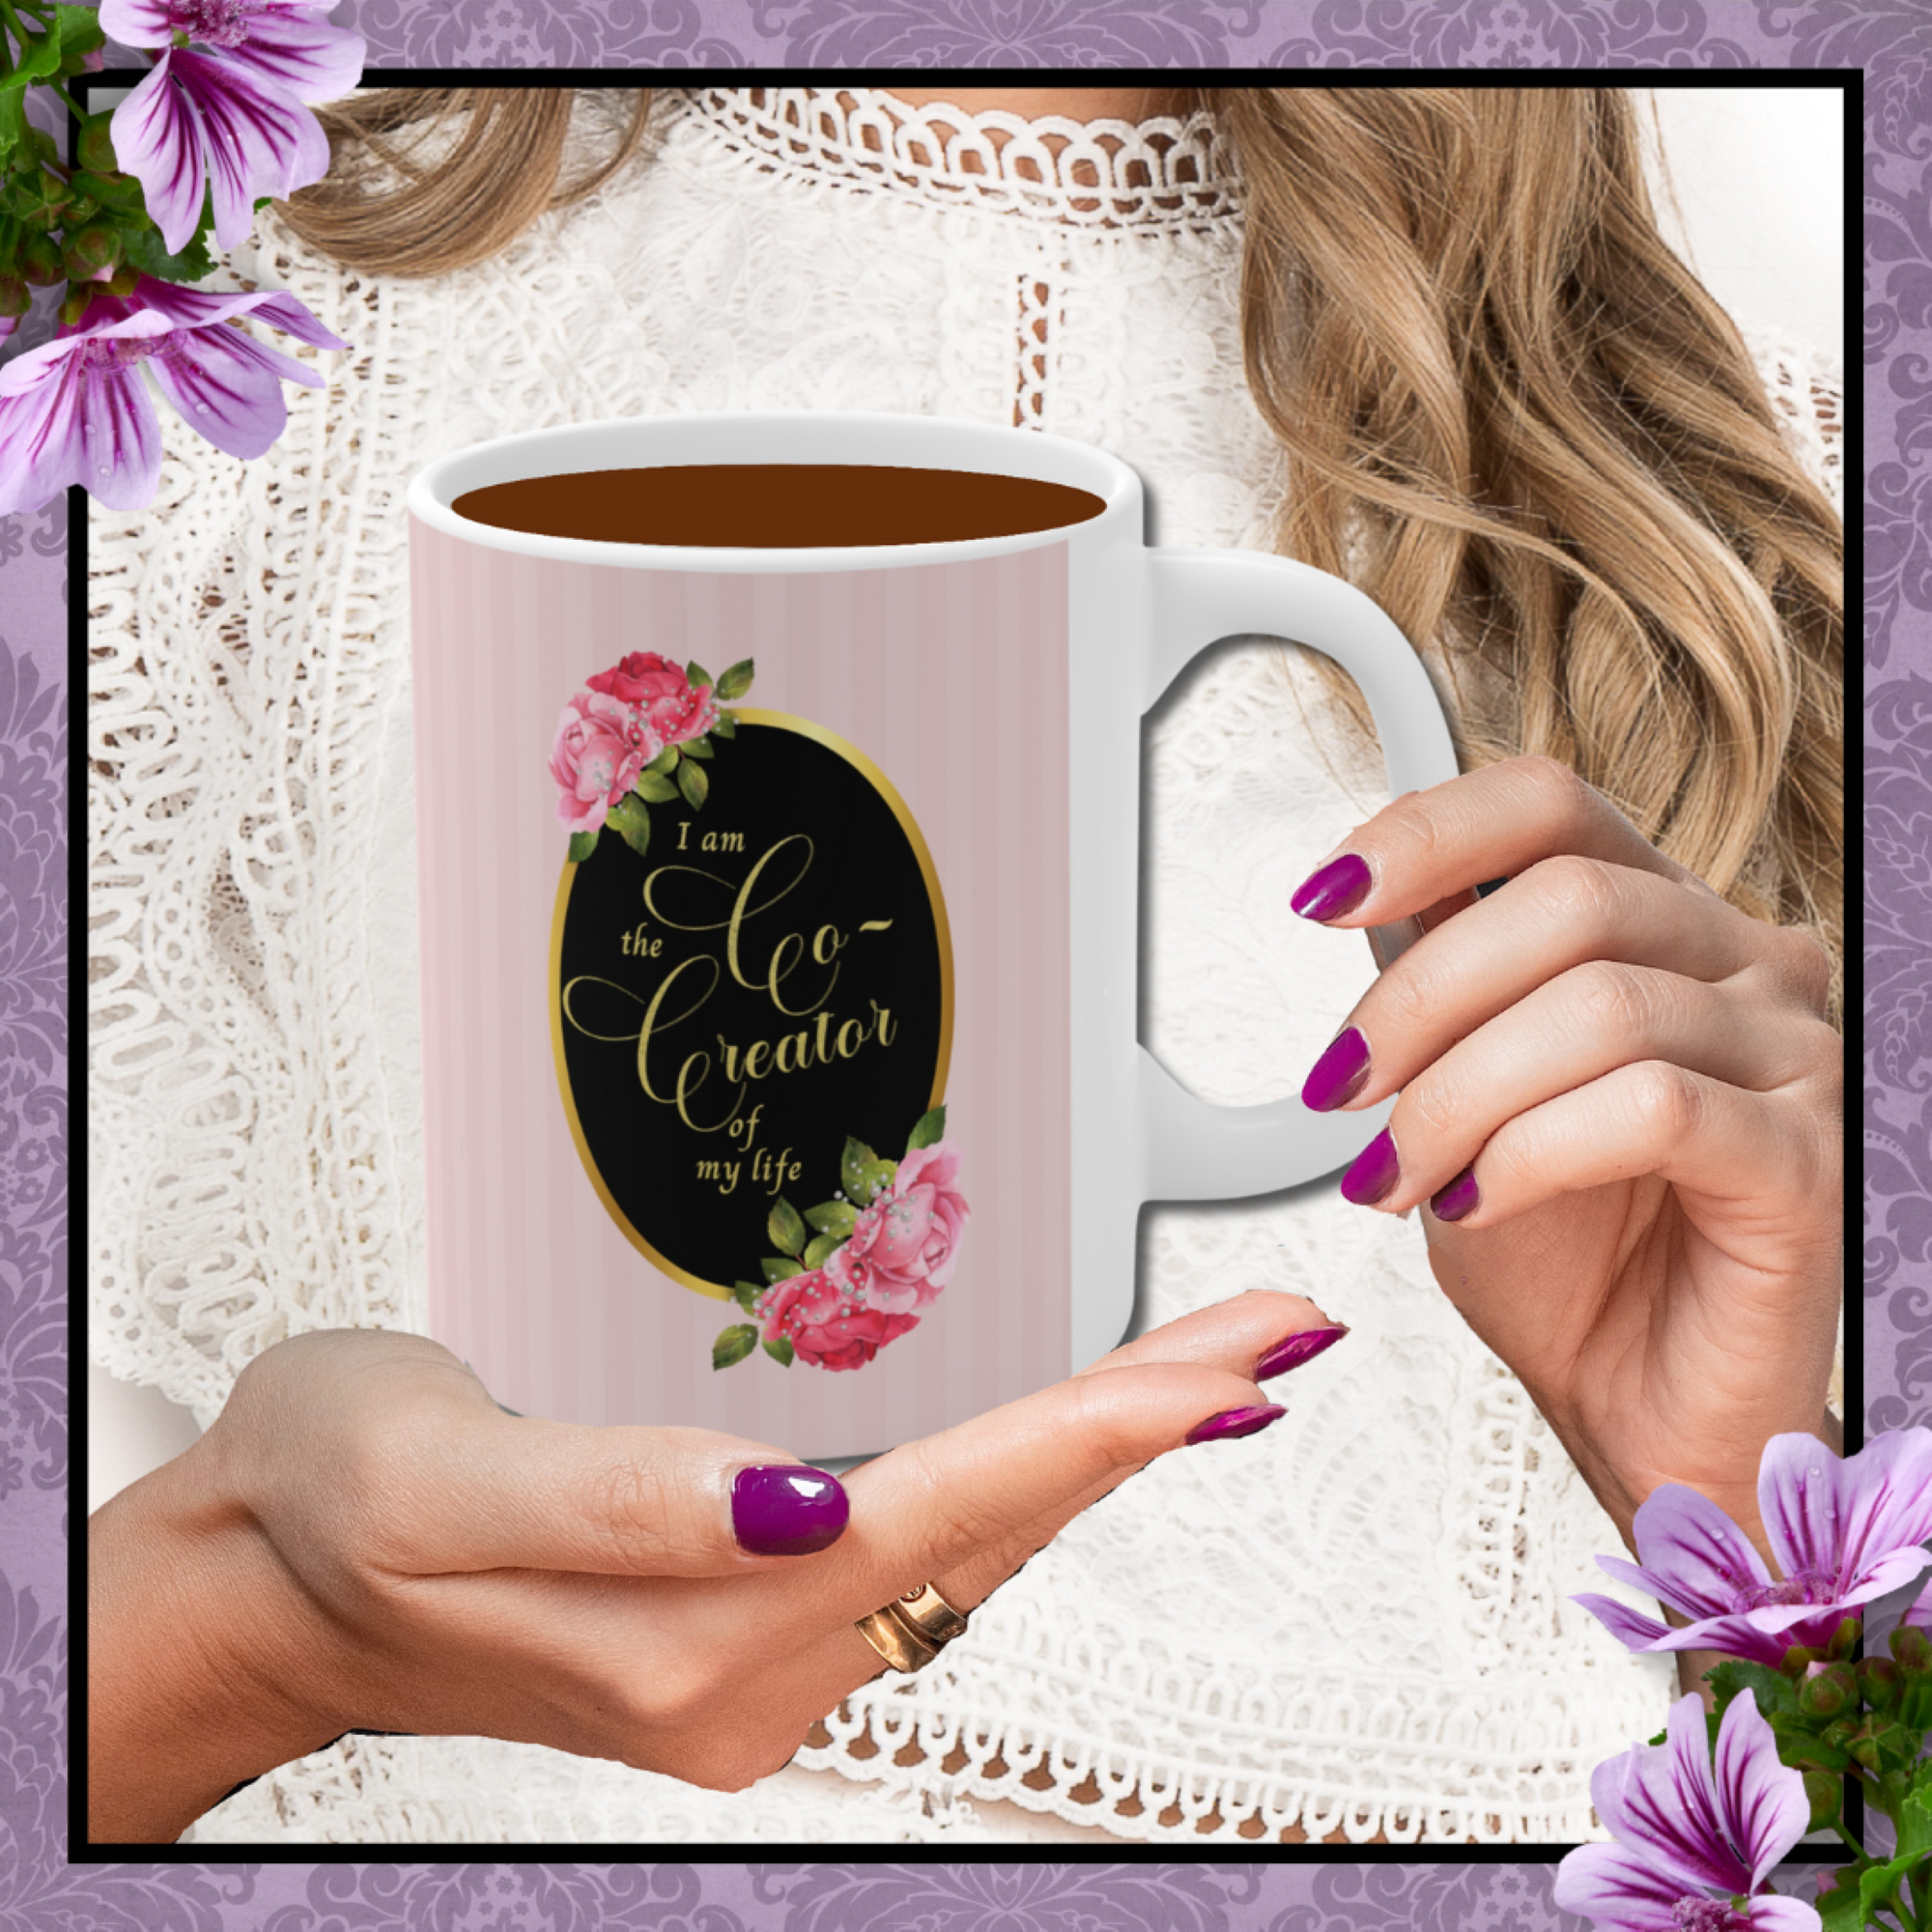 Hands with rose nail polish holding a ceramic mug with saying" I am the co-creator of my life" written in gold lettering on a black oval with gold edge accented with large pink roses at the top and bottom of the oval on a background of pink stripes.